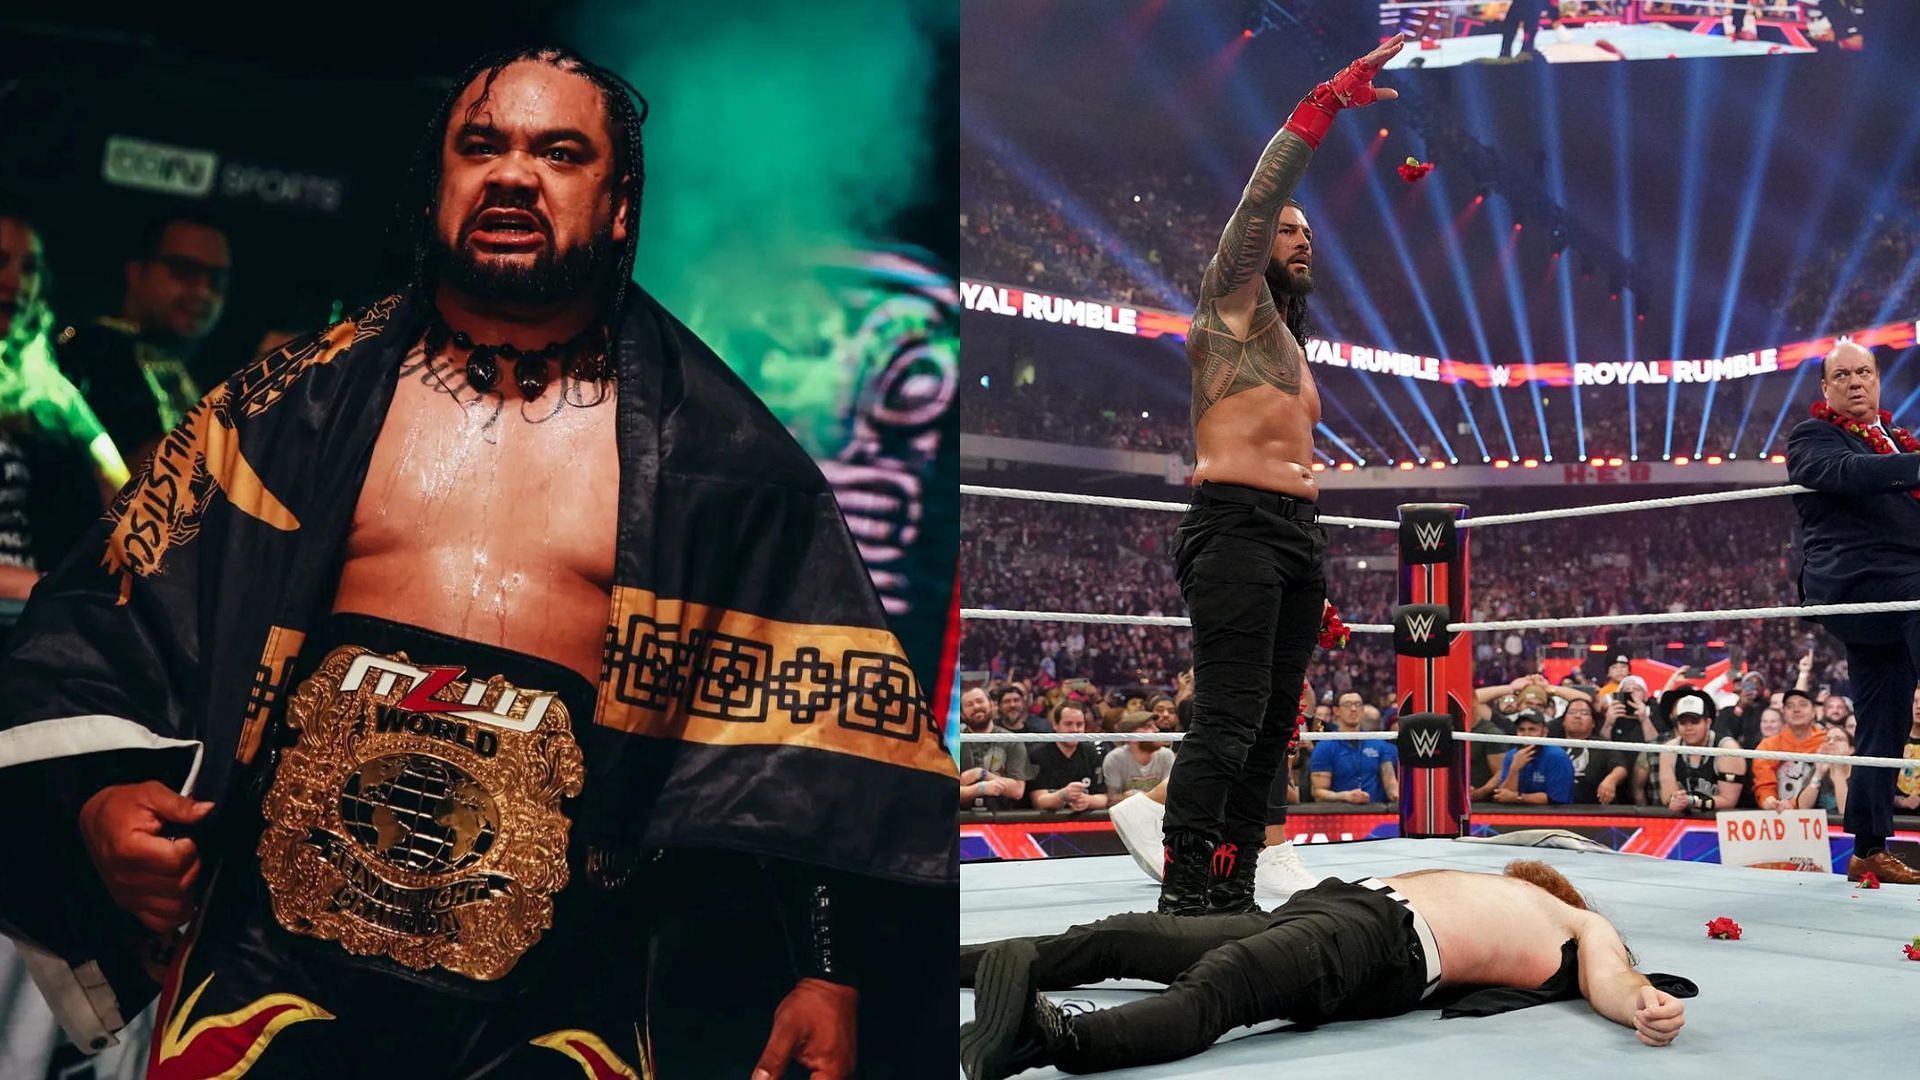 Jacob Fatu has reacted to a tweet from a Bloodline member